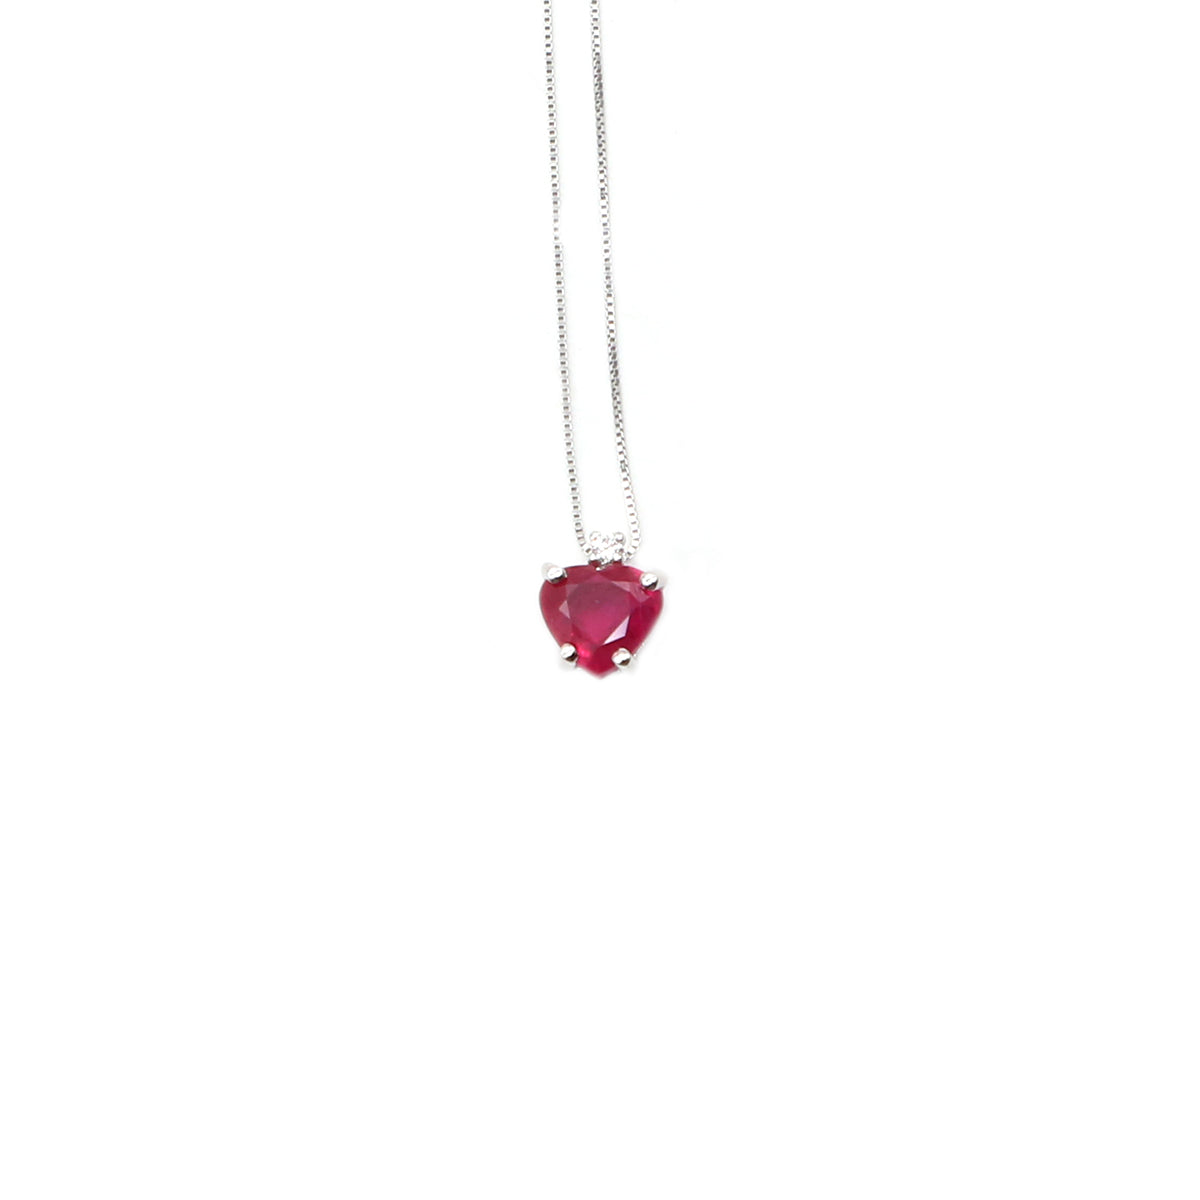 306 gold necklace with ruby.